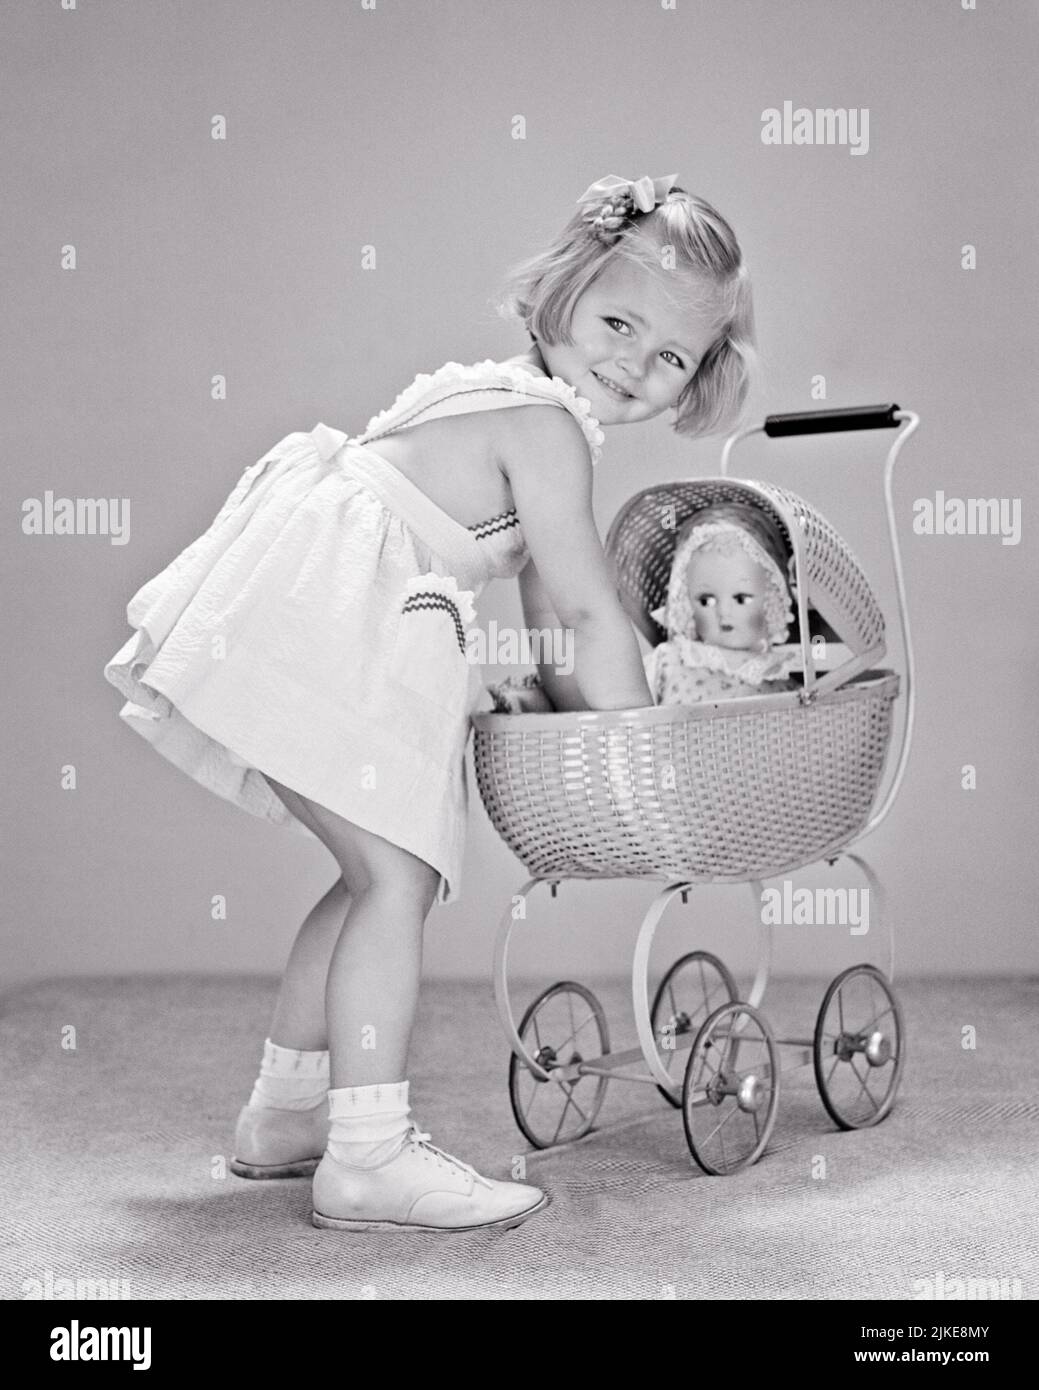 1940s SMILING BLONDE GIRL WEARING WHITE DRESS PICKING UP HER DOLL FROM A TOY STROLLER PRAM WHILE LOOKING OVER HER SHOULDER - j9292 HAR001 HARS B&W MATERNAL HAPPINESS CHEERFUL MODELS FEMININE SMILES CONCEPTUAL IMAGINATION JOYFUL ROLE-PLAYING STYLISH BABY BUGGY BEHAVIOR GENDER GROWTH JUVENILES STEREOTYPICAL BABY CARRIAGE BLACK AND WHITE CAUCASIAN ETHNICITY HAR001 OLD FASHIONED Stock Photo